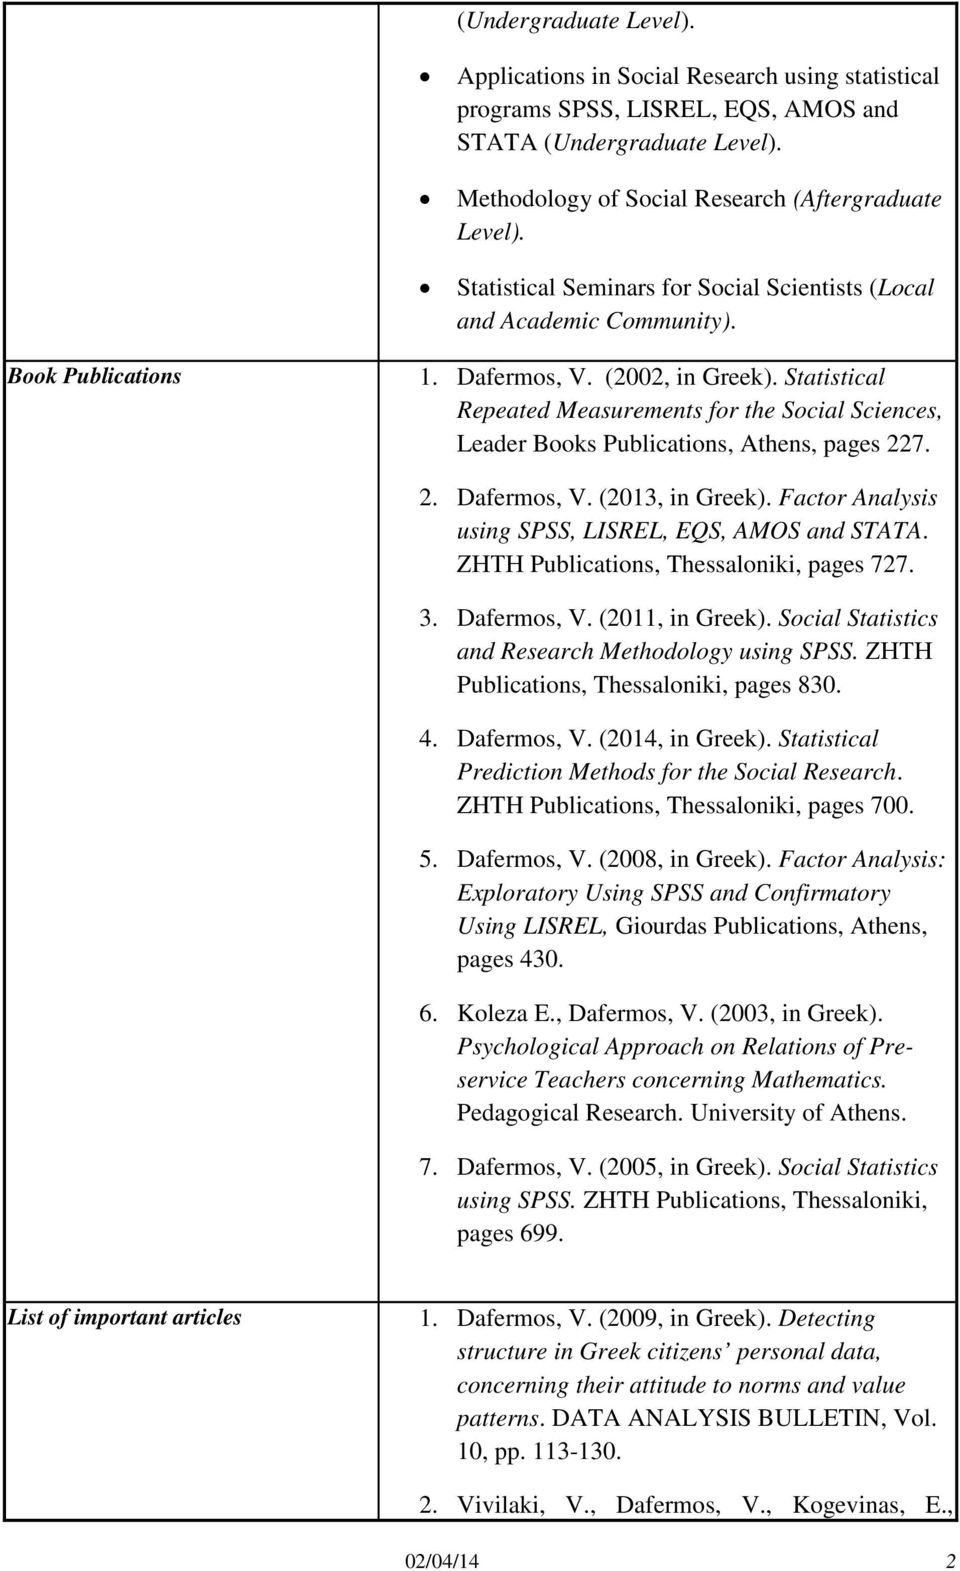 Statistical Repeated Measurements for the Social Sciences, Leader Books Publications, Athens, pages 227. 2. Dafermos, V. (2013, in Greek). Factor Analysis using SPSS, LISREL, EQS, AMOS and STATA.